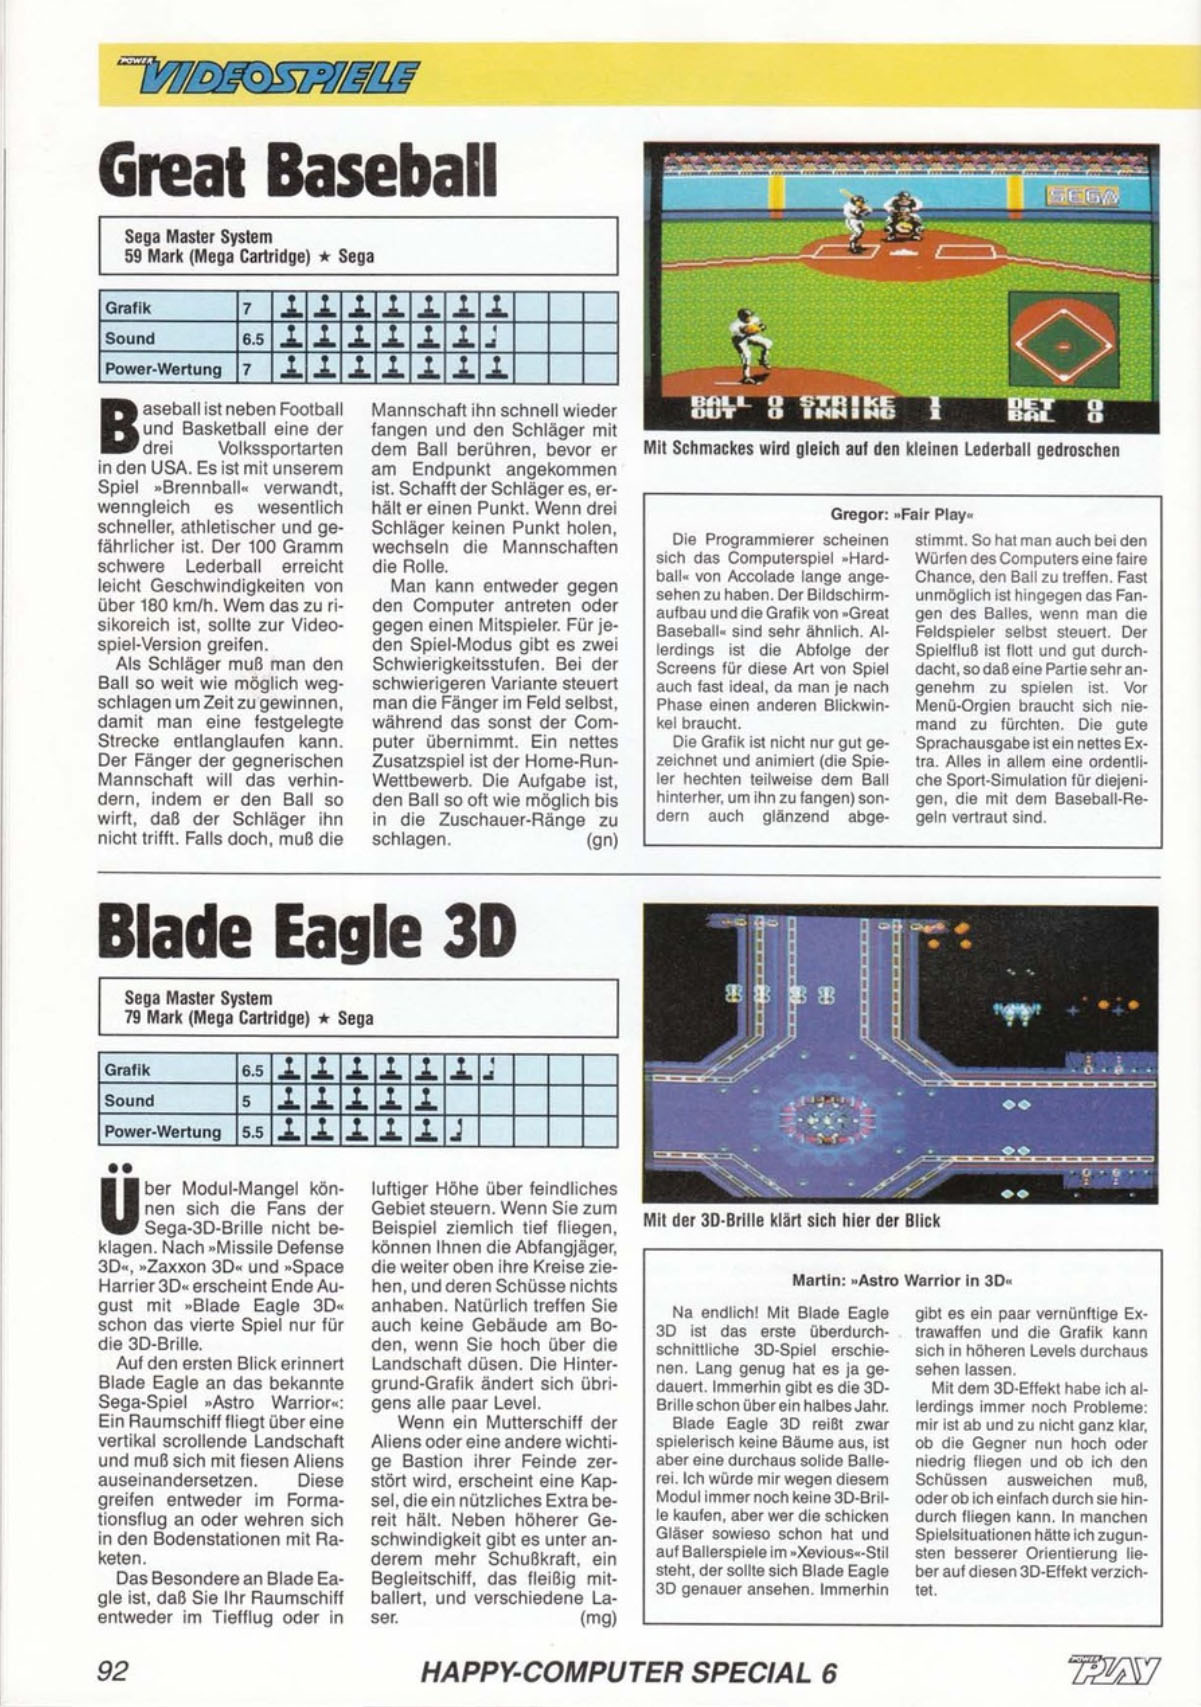 Great Baseball Review, Power Play July 1988 page 92